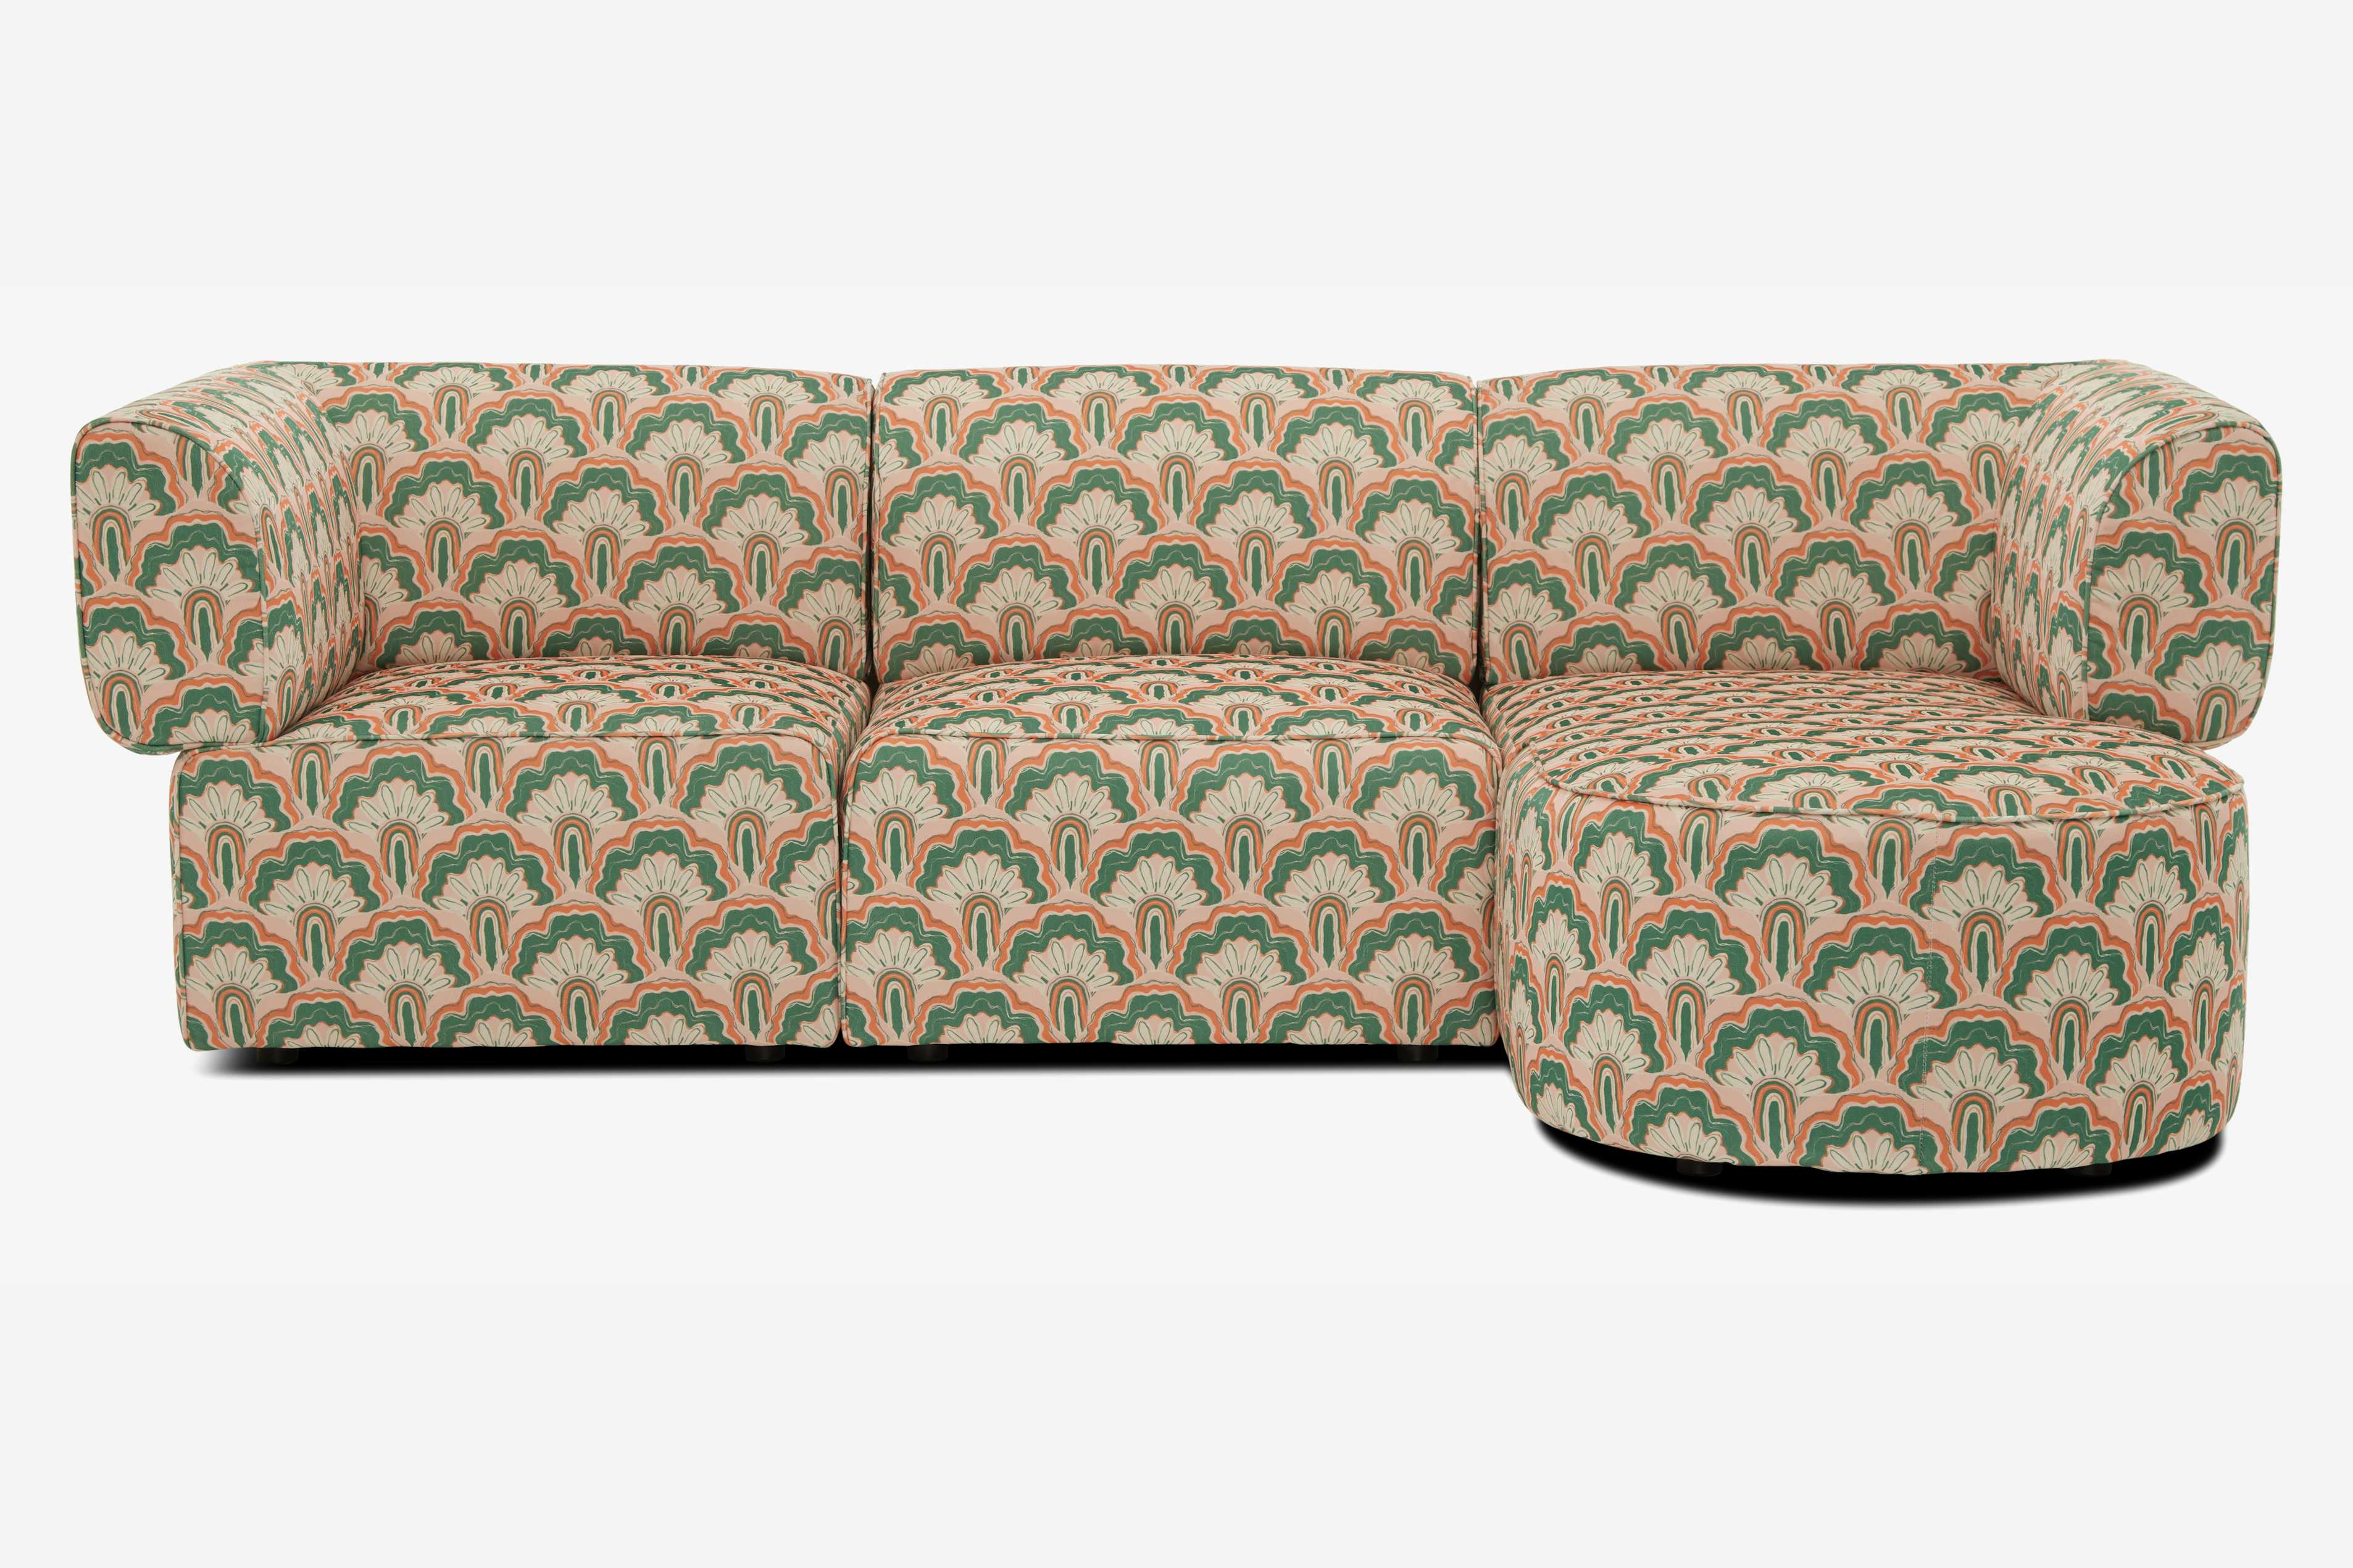 Deco Peacock Diane Modular Chaise Sectional Limited Edition